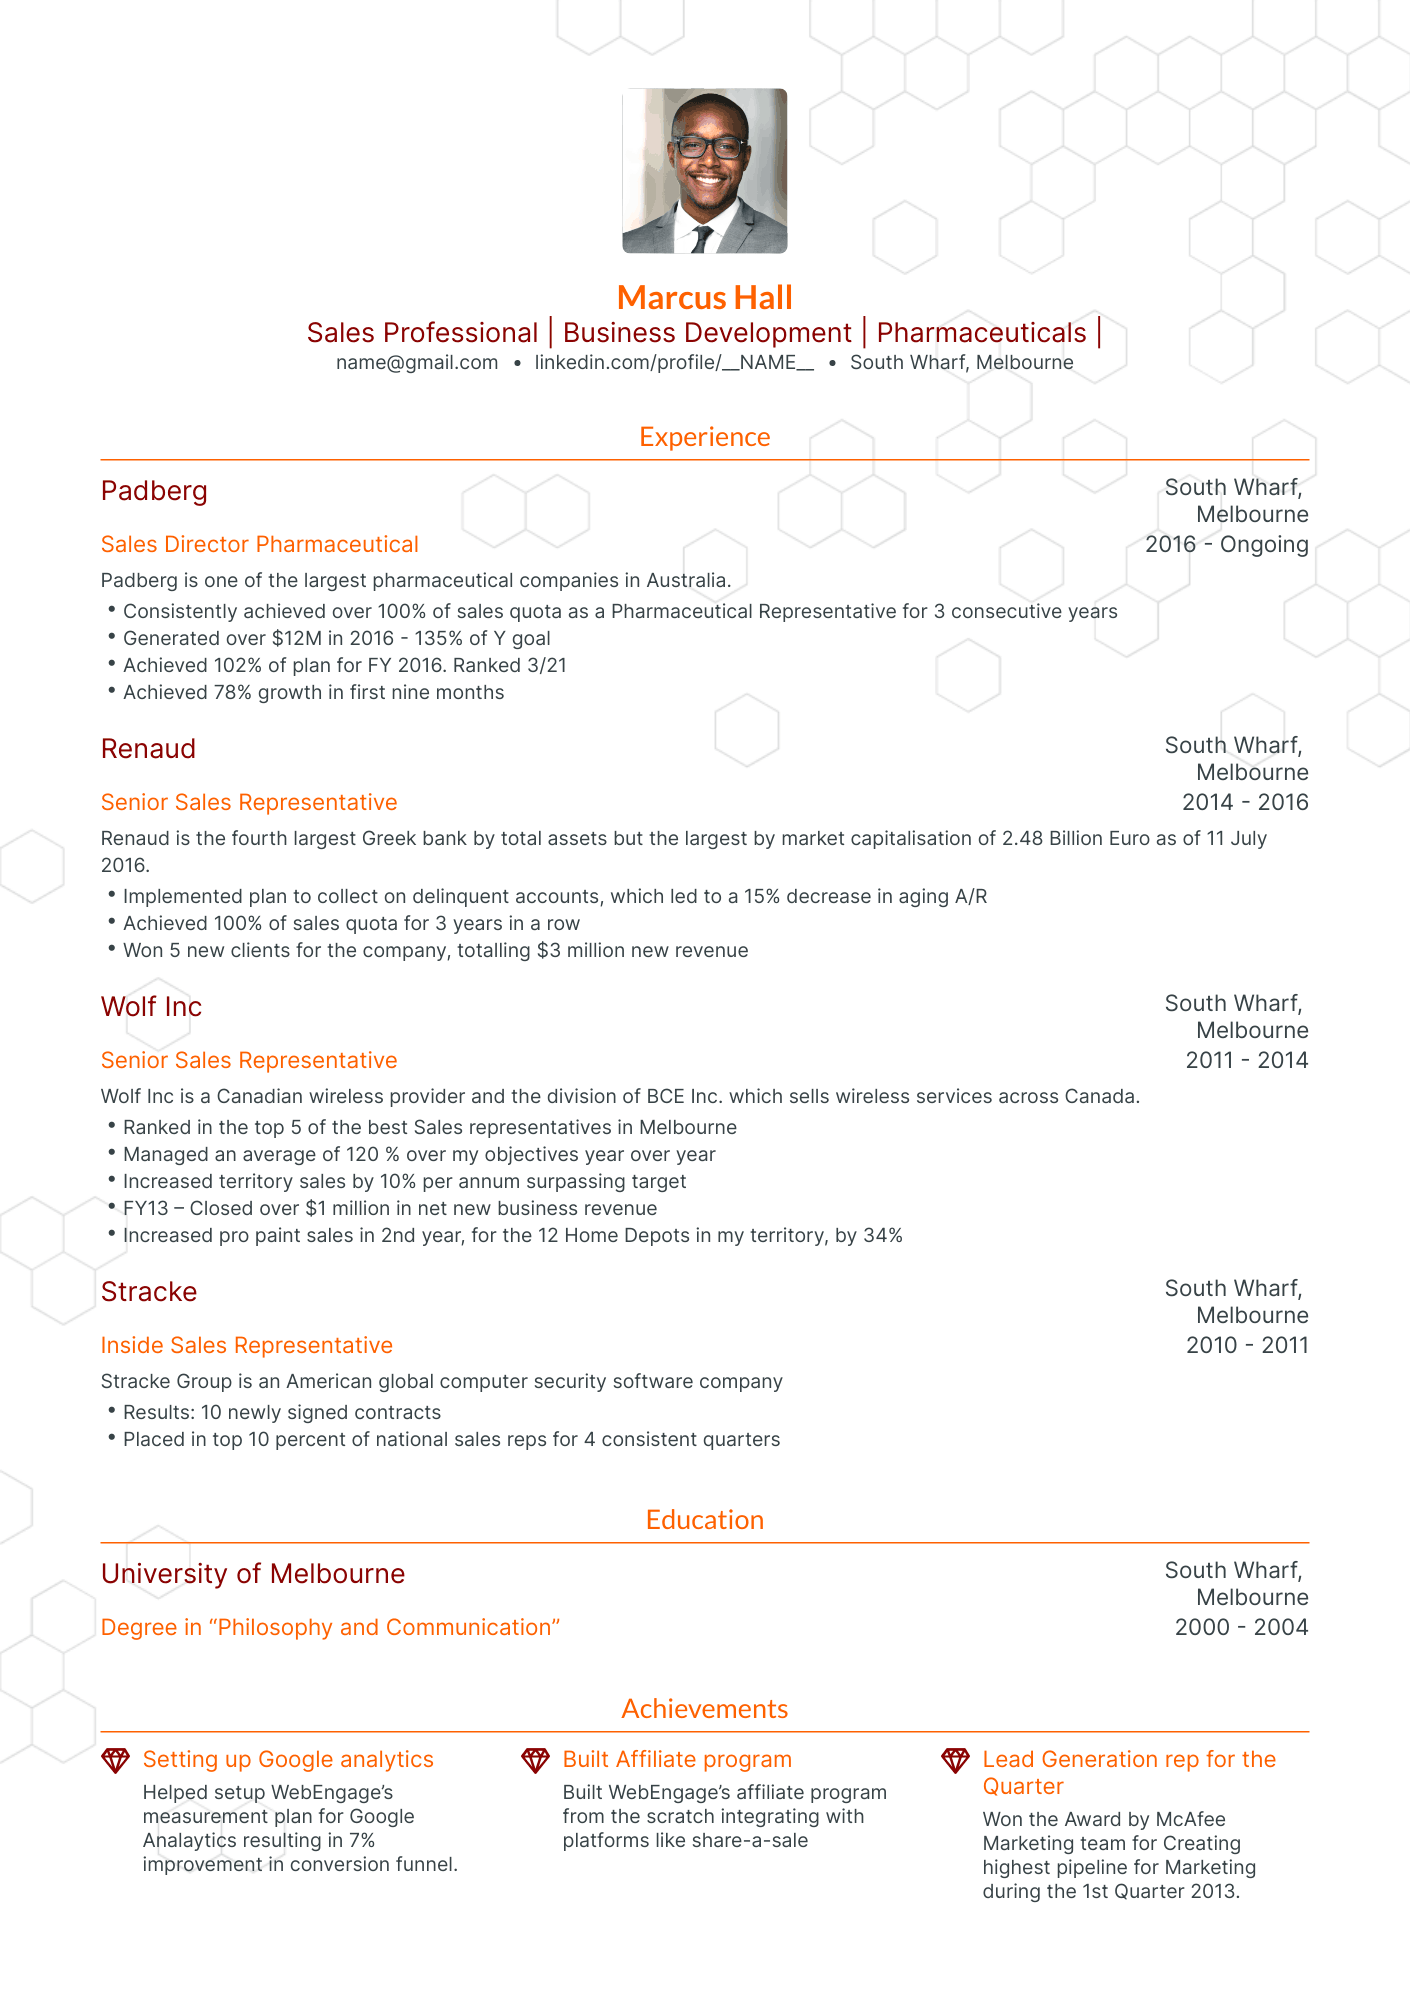 Traditional Pharmaceutical Sales Rep Resume Template